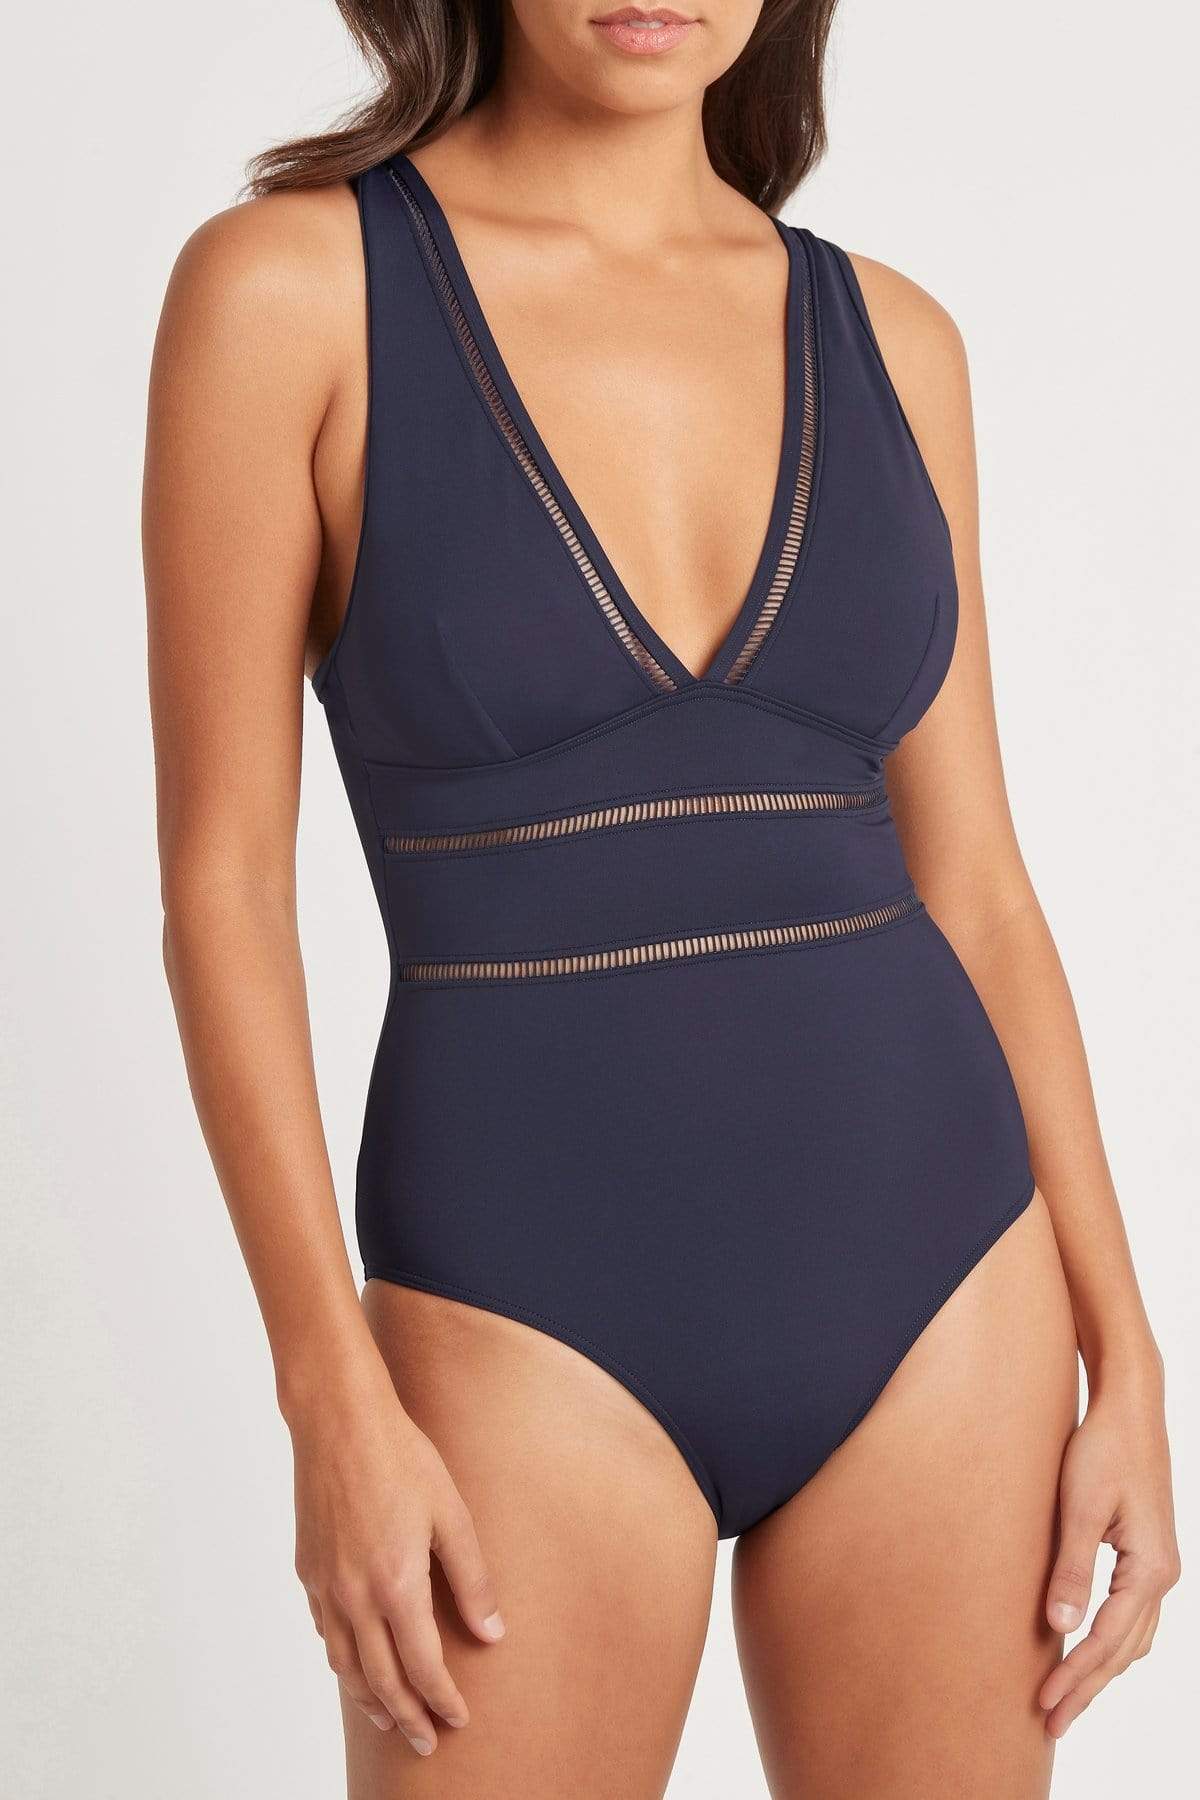 Navy Blue Full Coverage One Piece